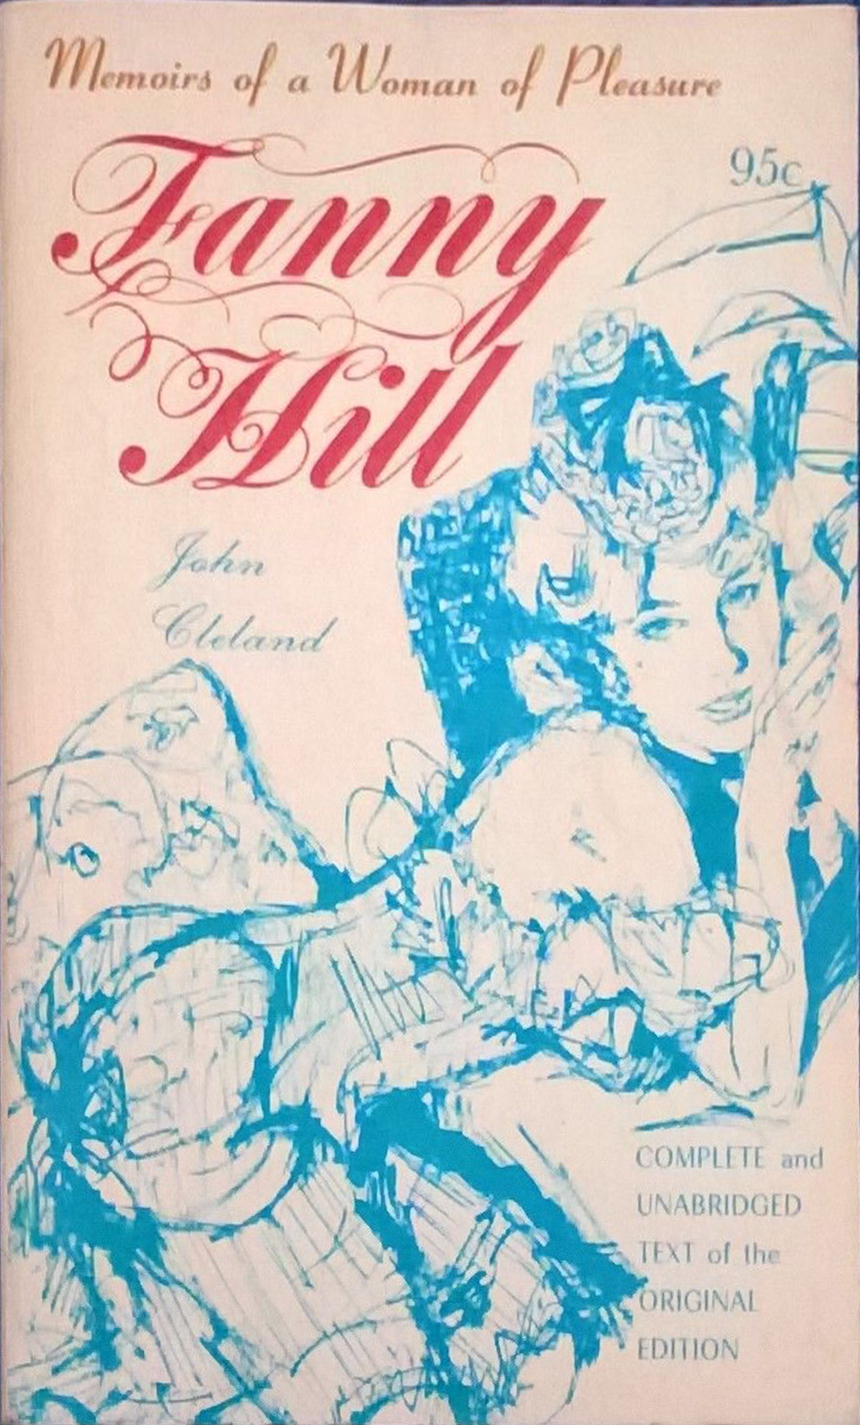 Fanny Hill - Memoirs of a Woman of Pleasure